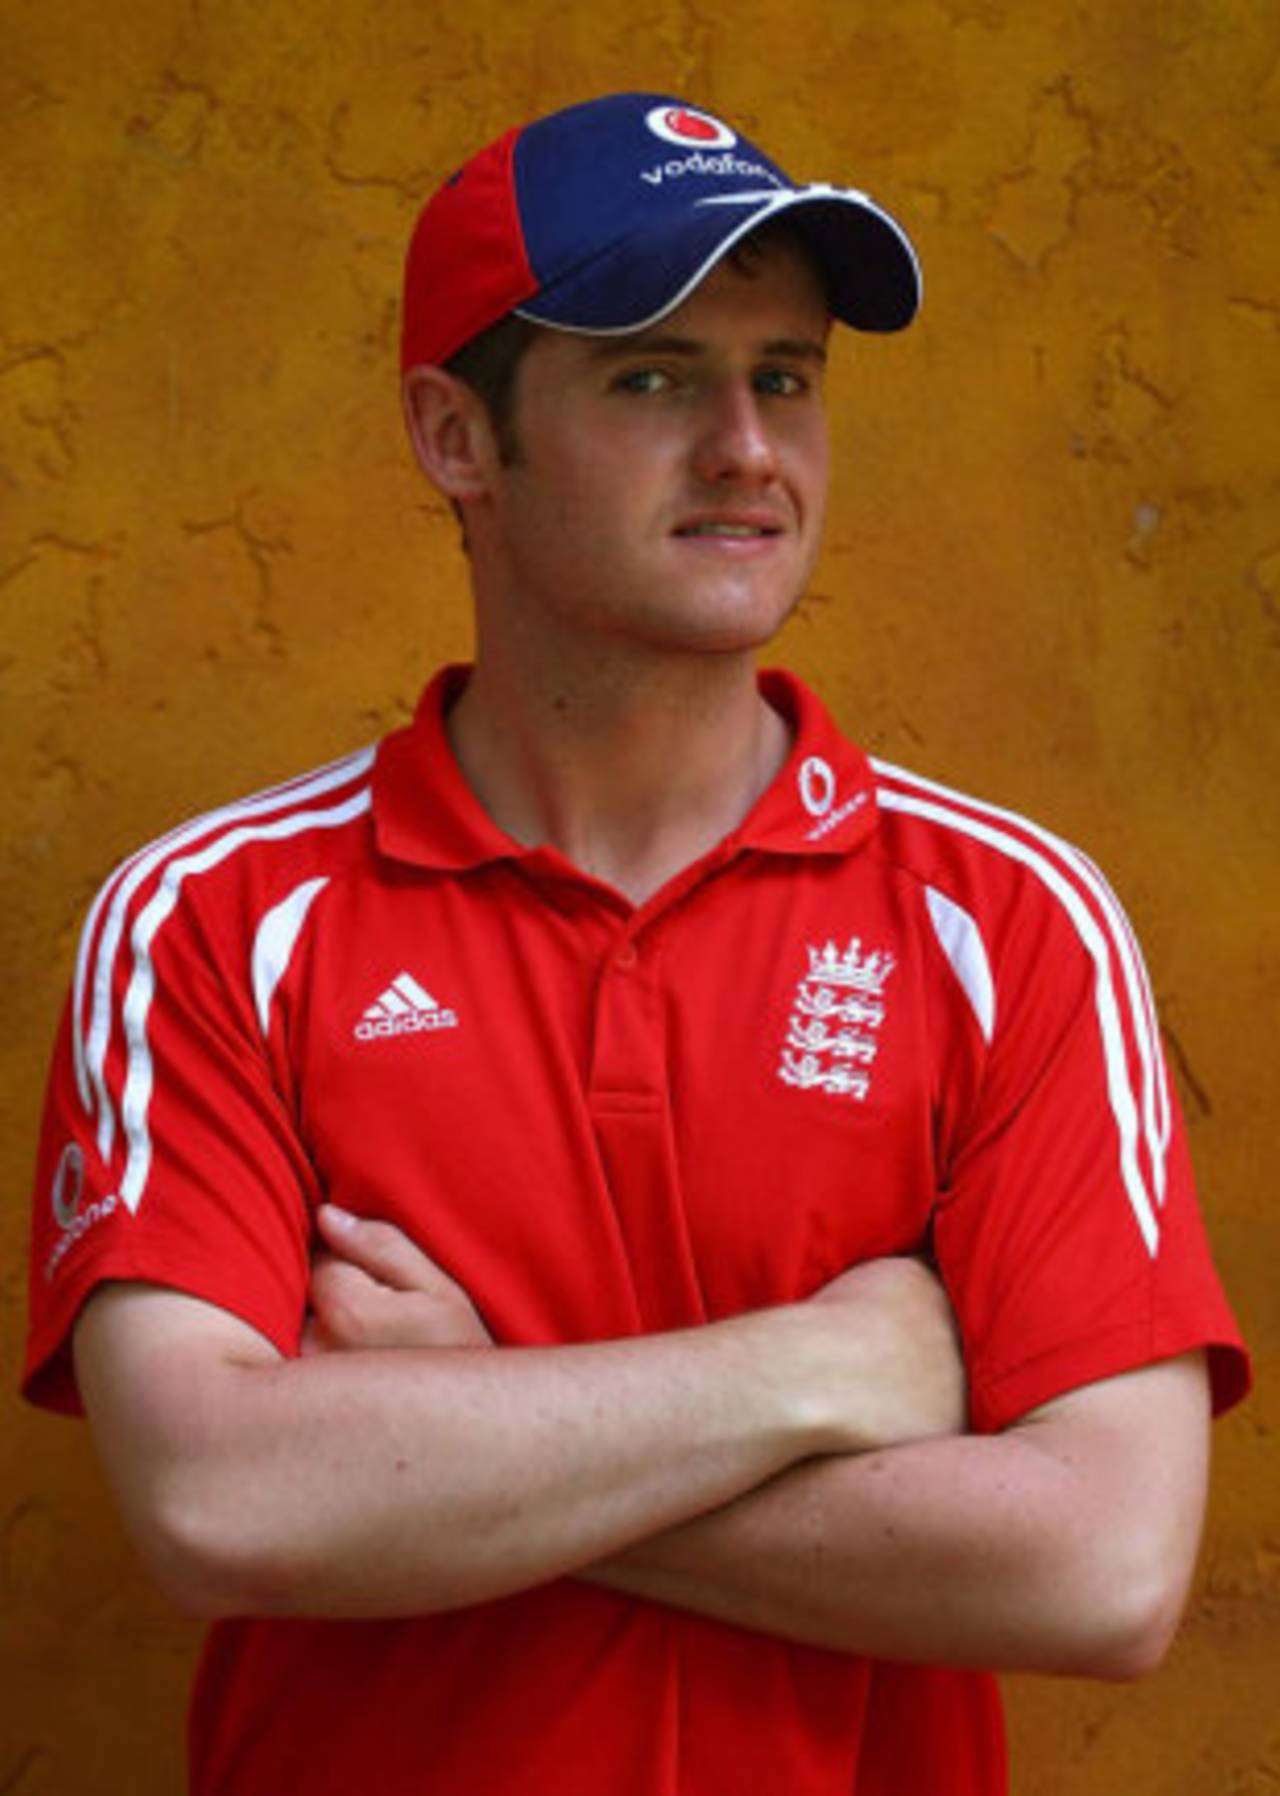 A headshot of Steven Davies, England in West Indies, March 17, 2009